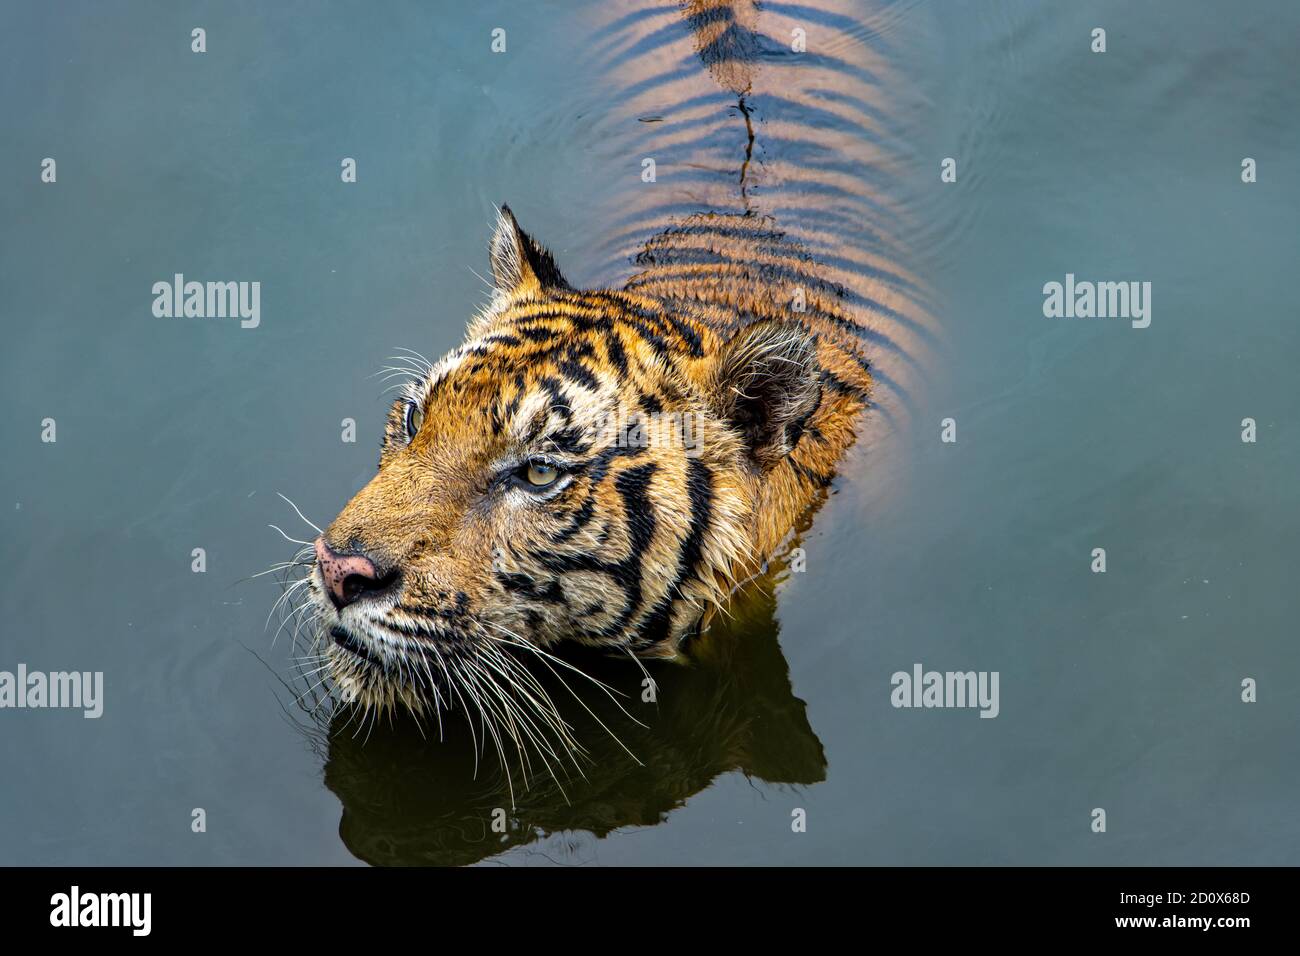 The tiger stands in the water and looks around. Stock Photo